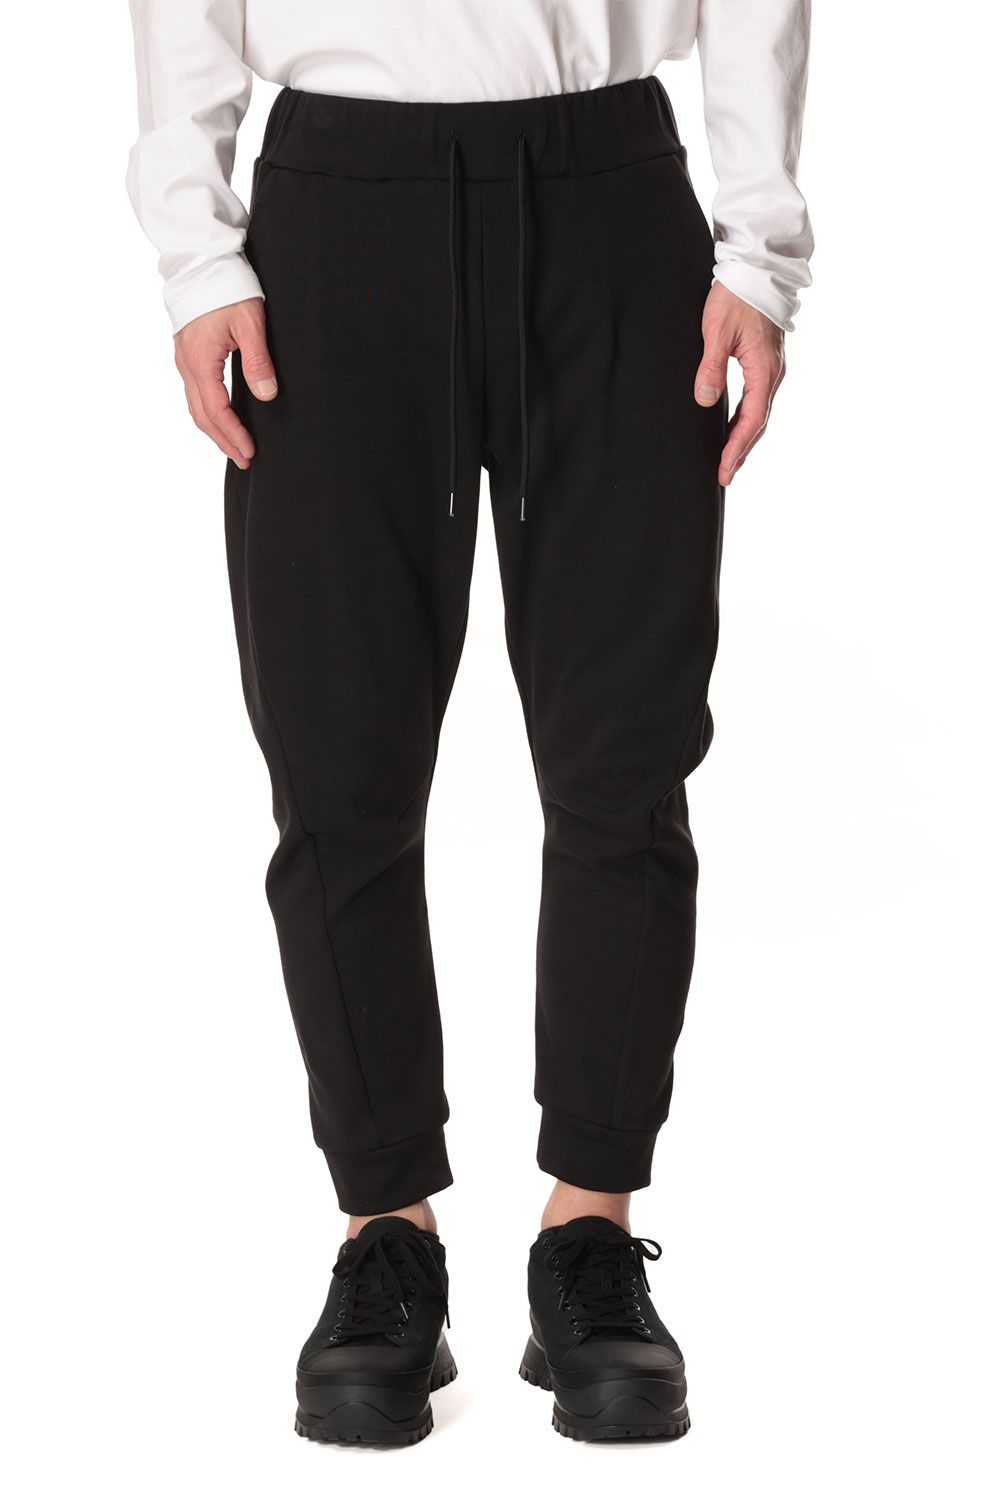 ATTACHMENT - CO/PE DOUBLE KNIT THREE DIMENSIONAL JOGGER TROUSERS